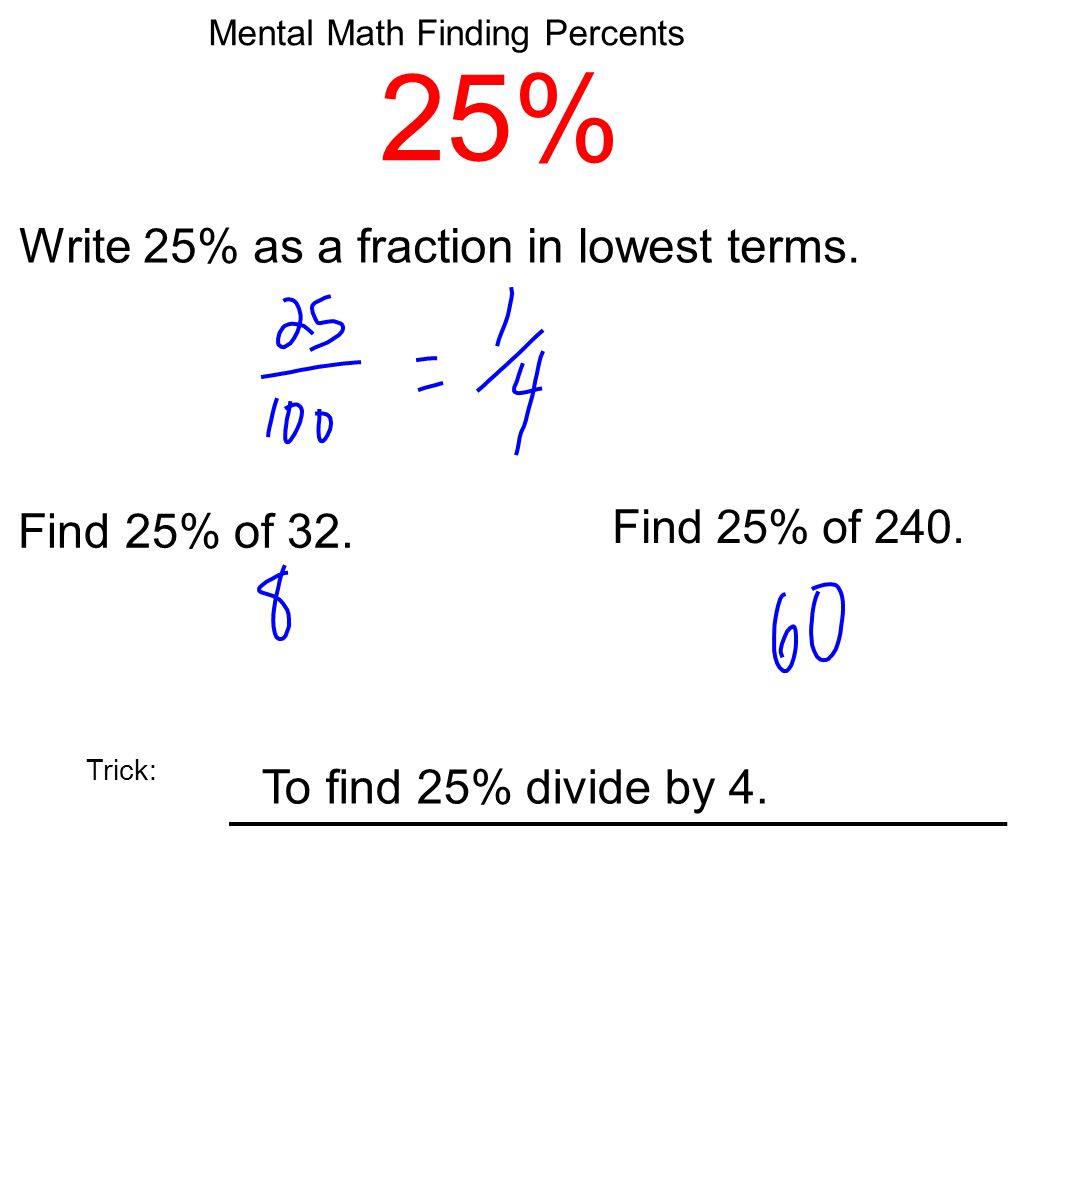 Mental Math Finding Percents 25% Write 25% as a fraction in lowest terms.